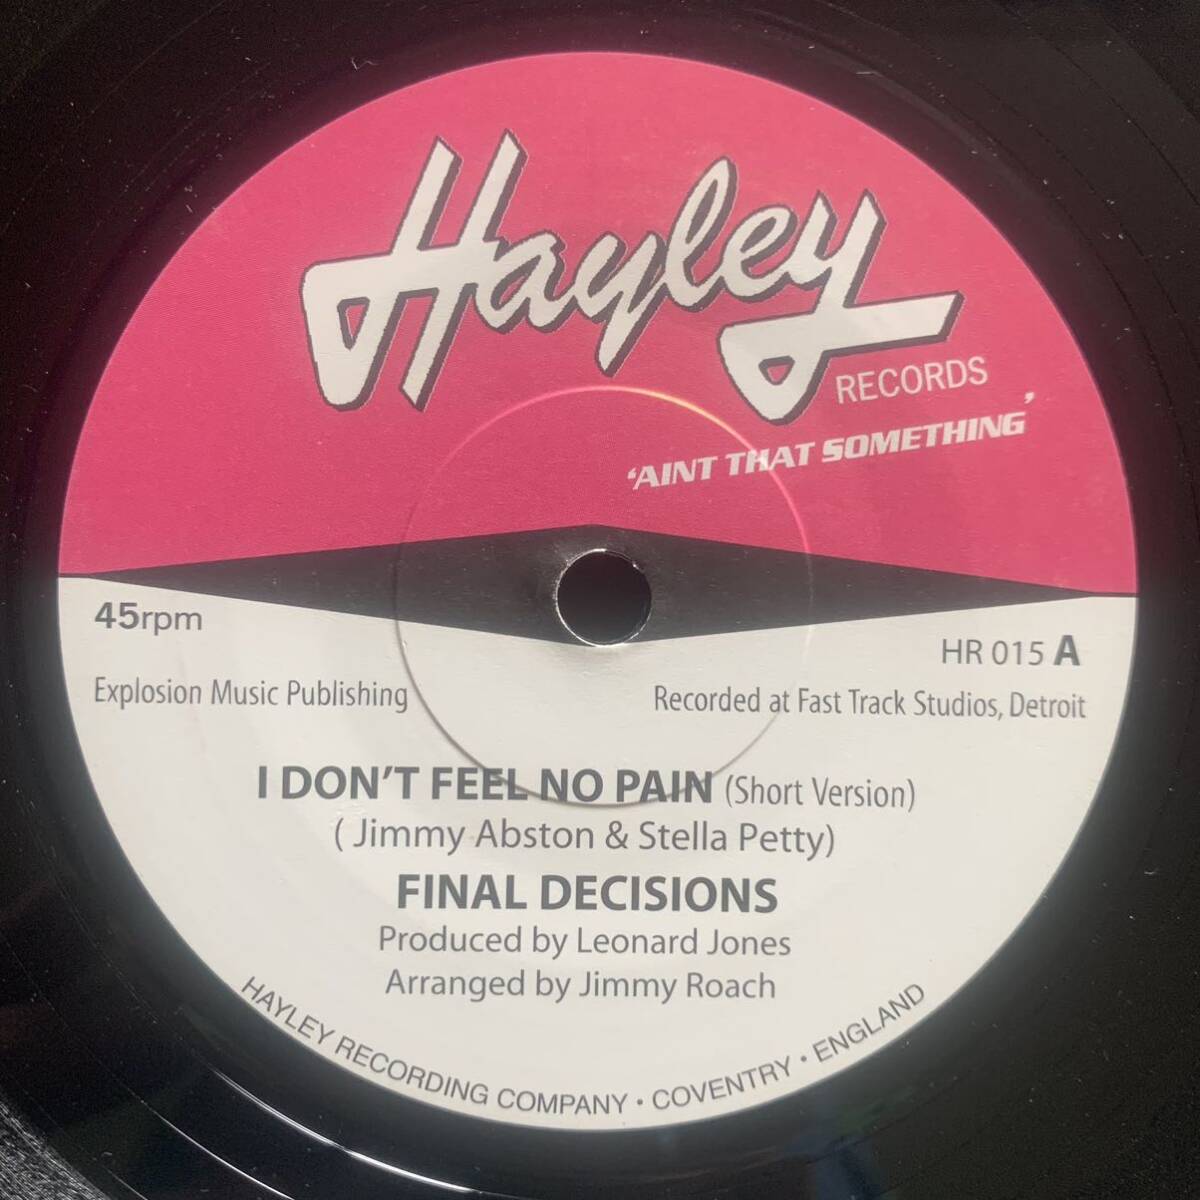 FINAL DECISIONS / I DON'T FEEL NO PAIN (Harley) soul45 - unreleased_画像3